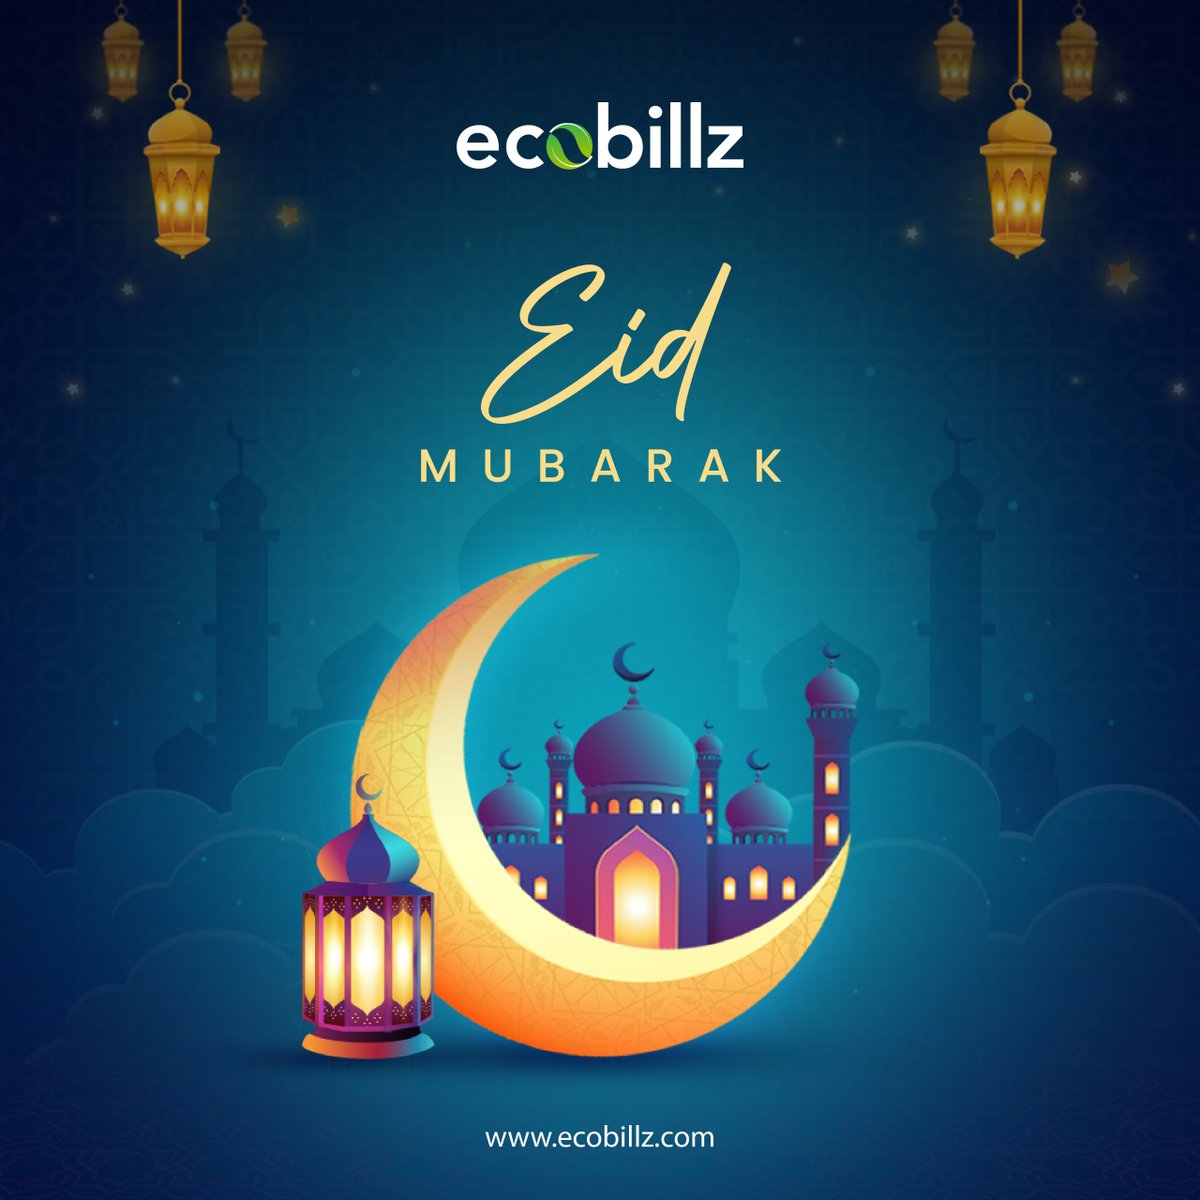 Eid Mubarak to all!!!! May the almighty bless all with prosperity, joy, good health and wealth!!!! #eid #eidmubarak #festival #festivities #almighty #blessingsfromalmighty #prosperity #goodhealth #mubarak